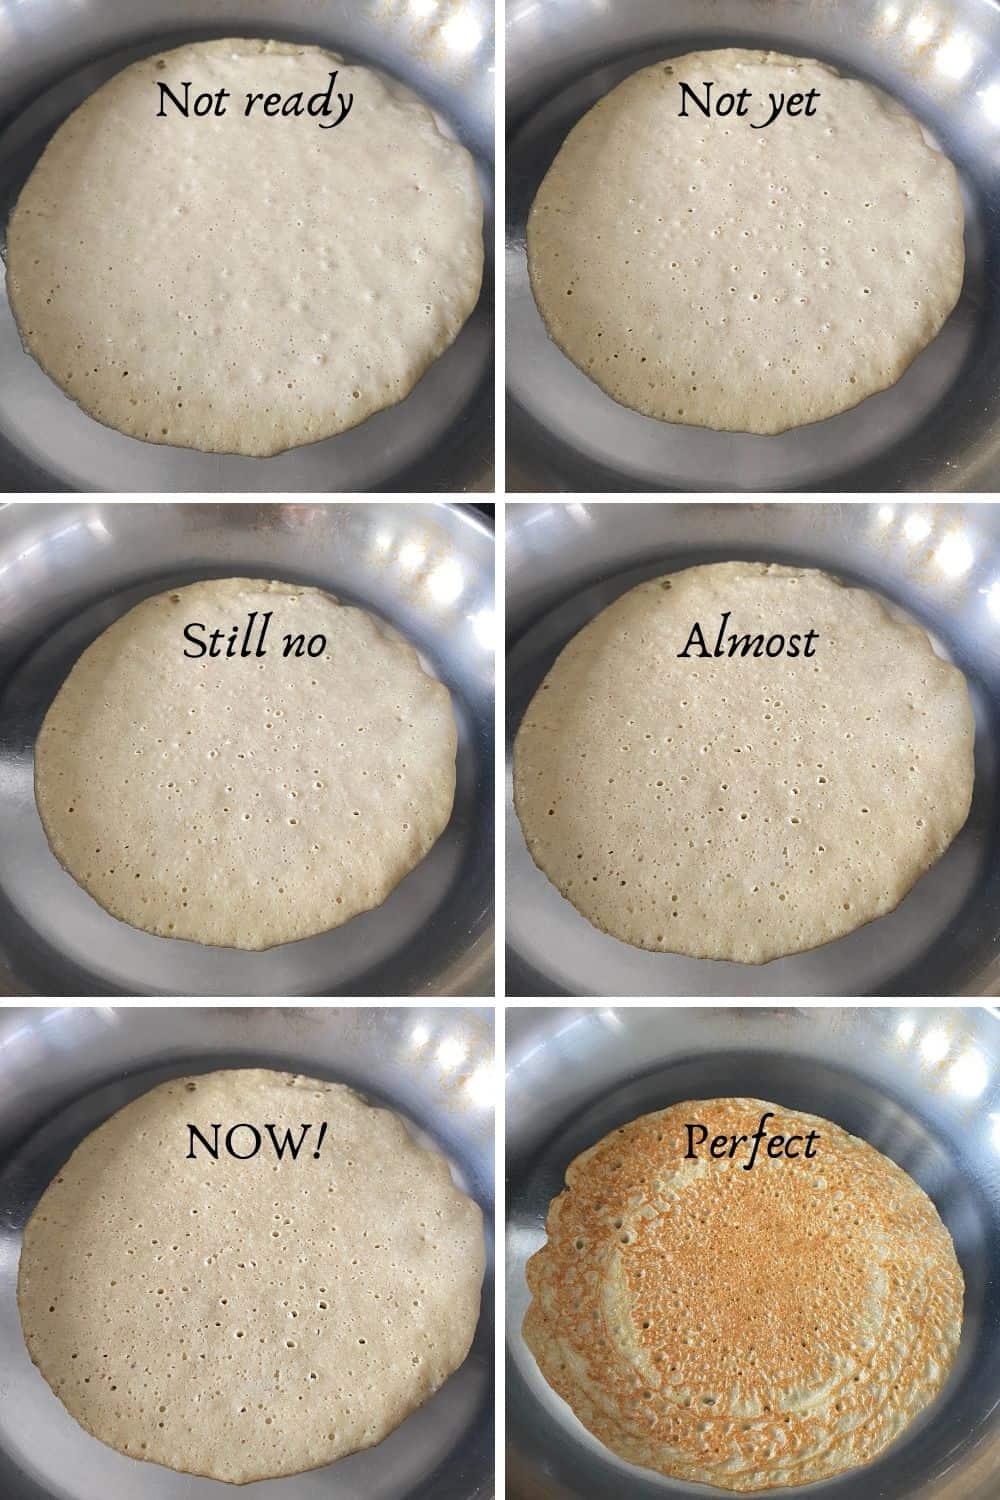 Visual guide showing when chickpea flour crepes are ready to flip.